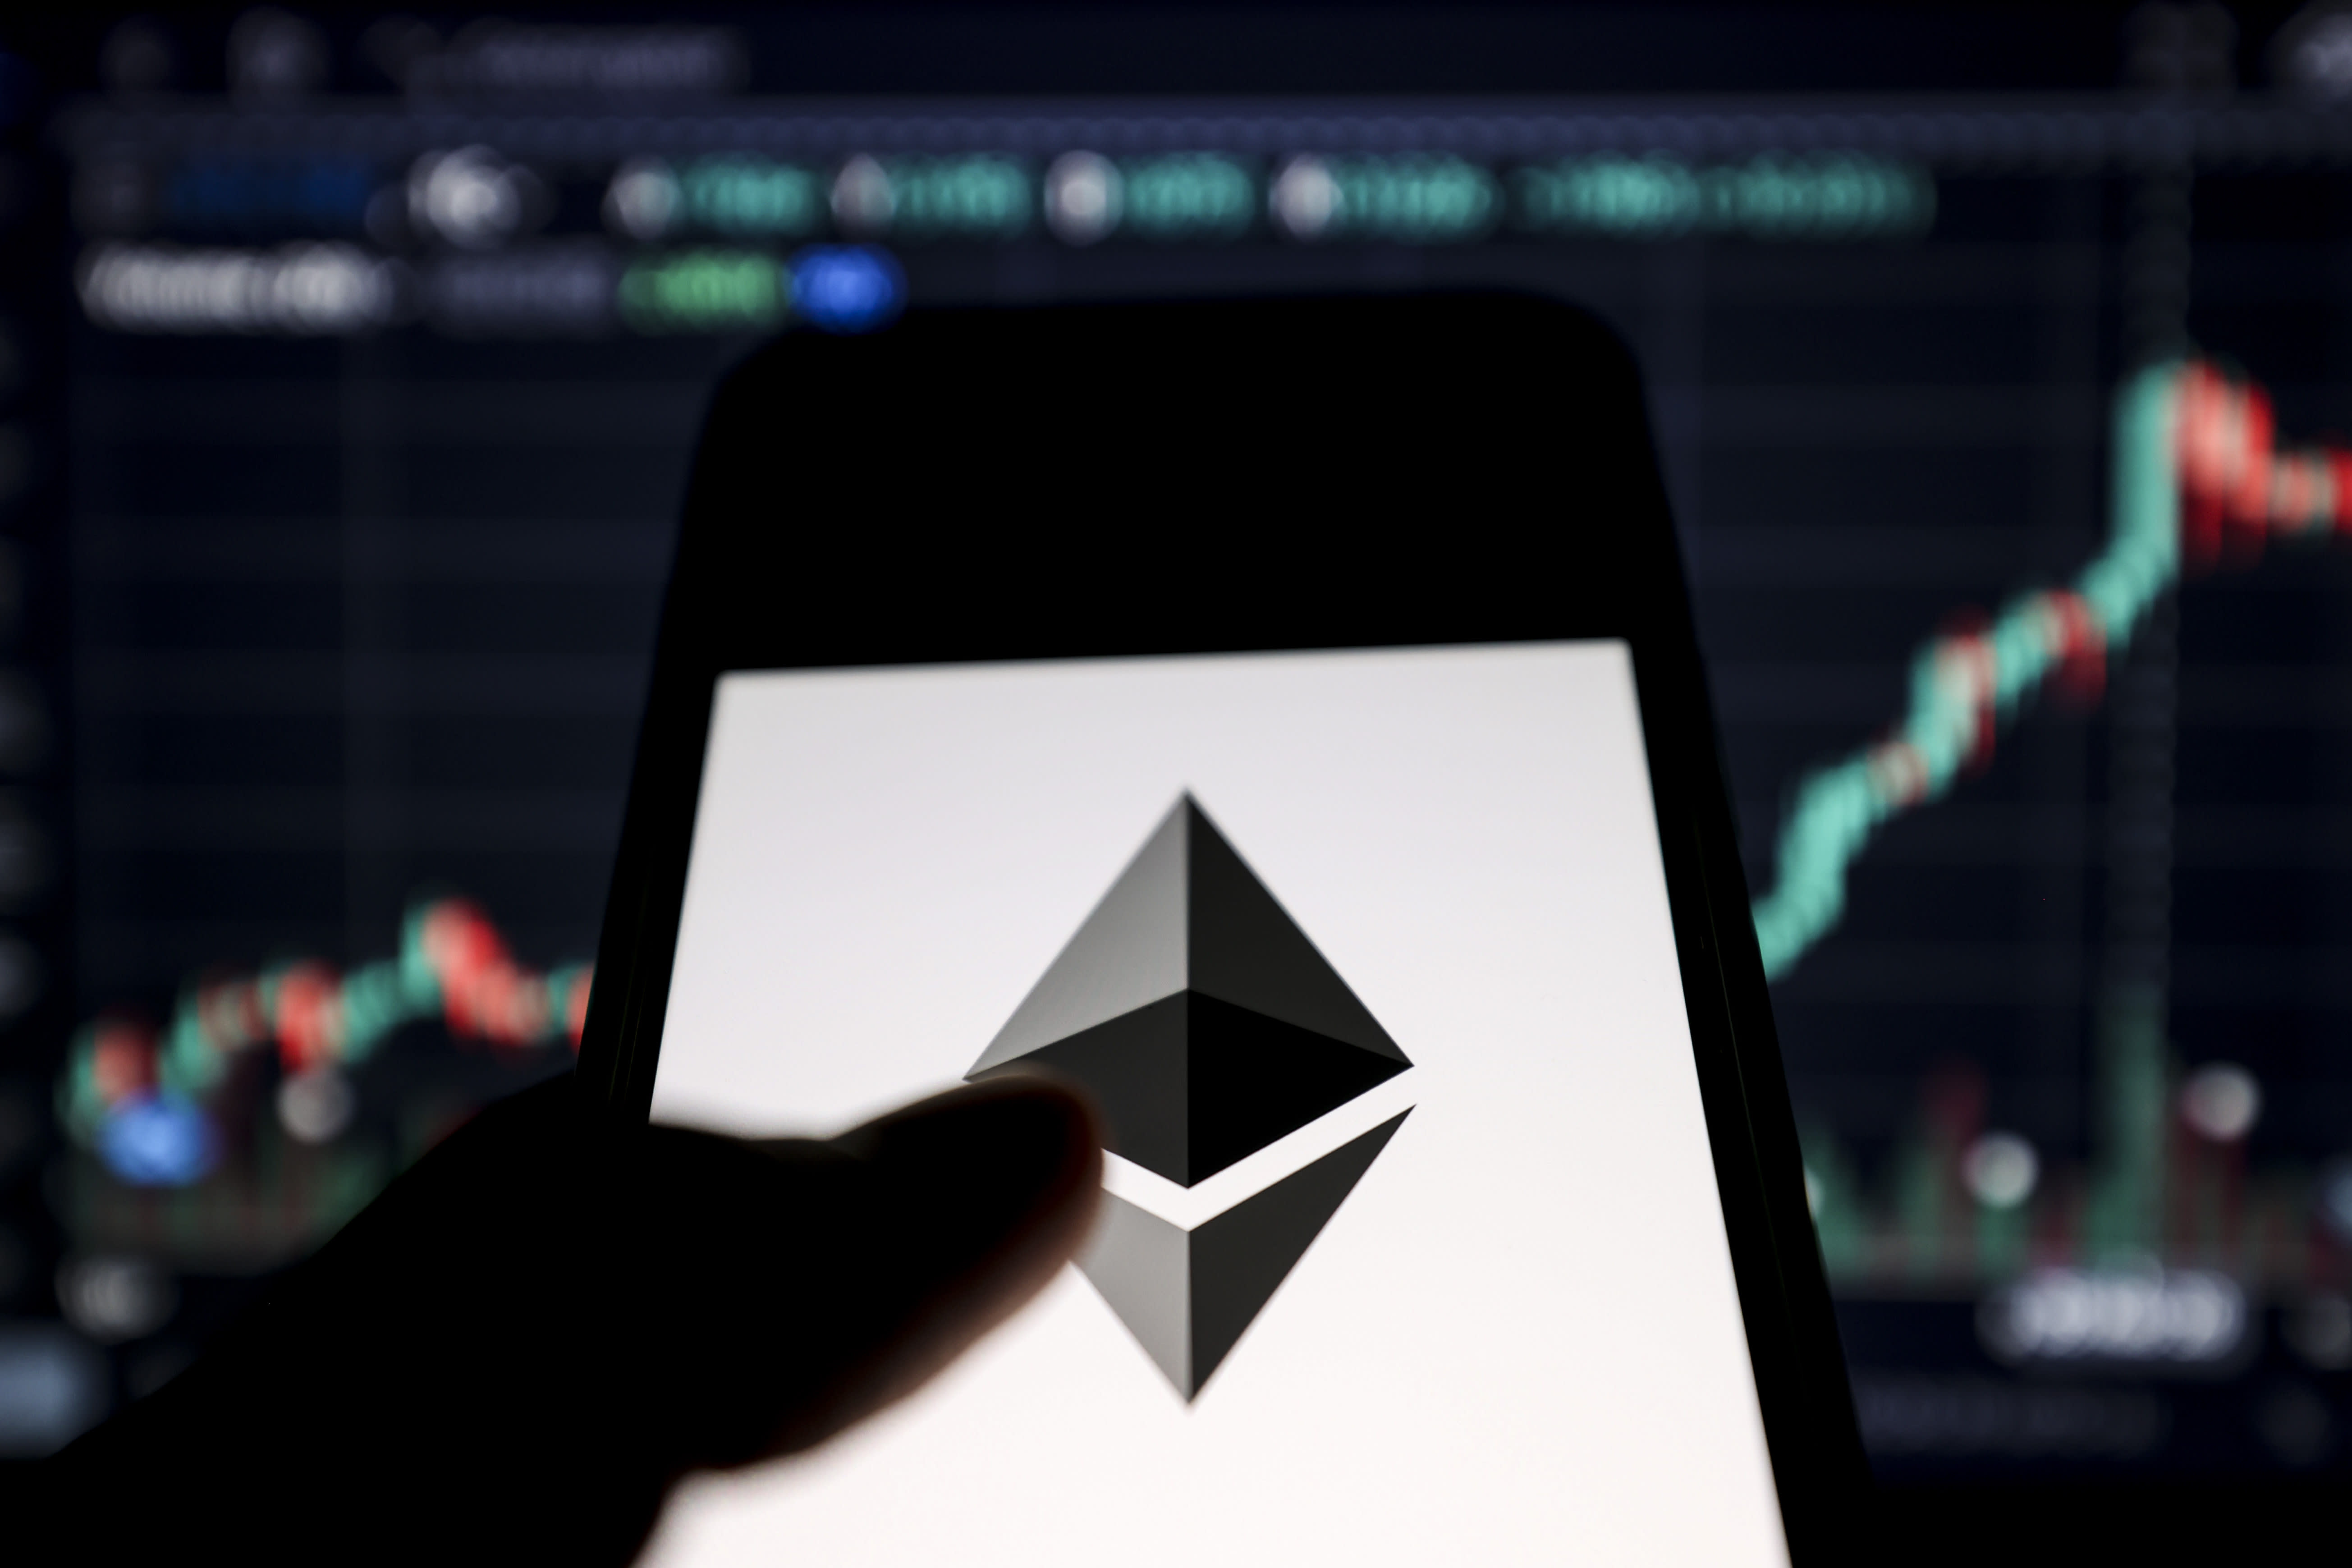 Ether falls this week as 'merge' hype fades. The crypto outlook from here